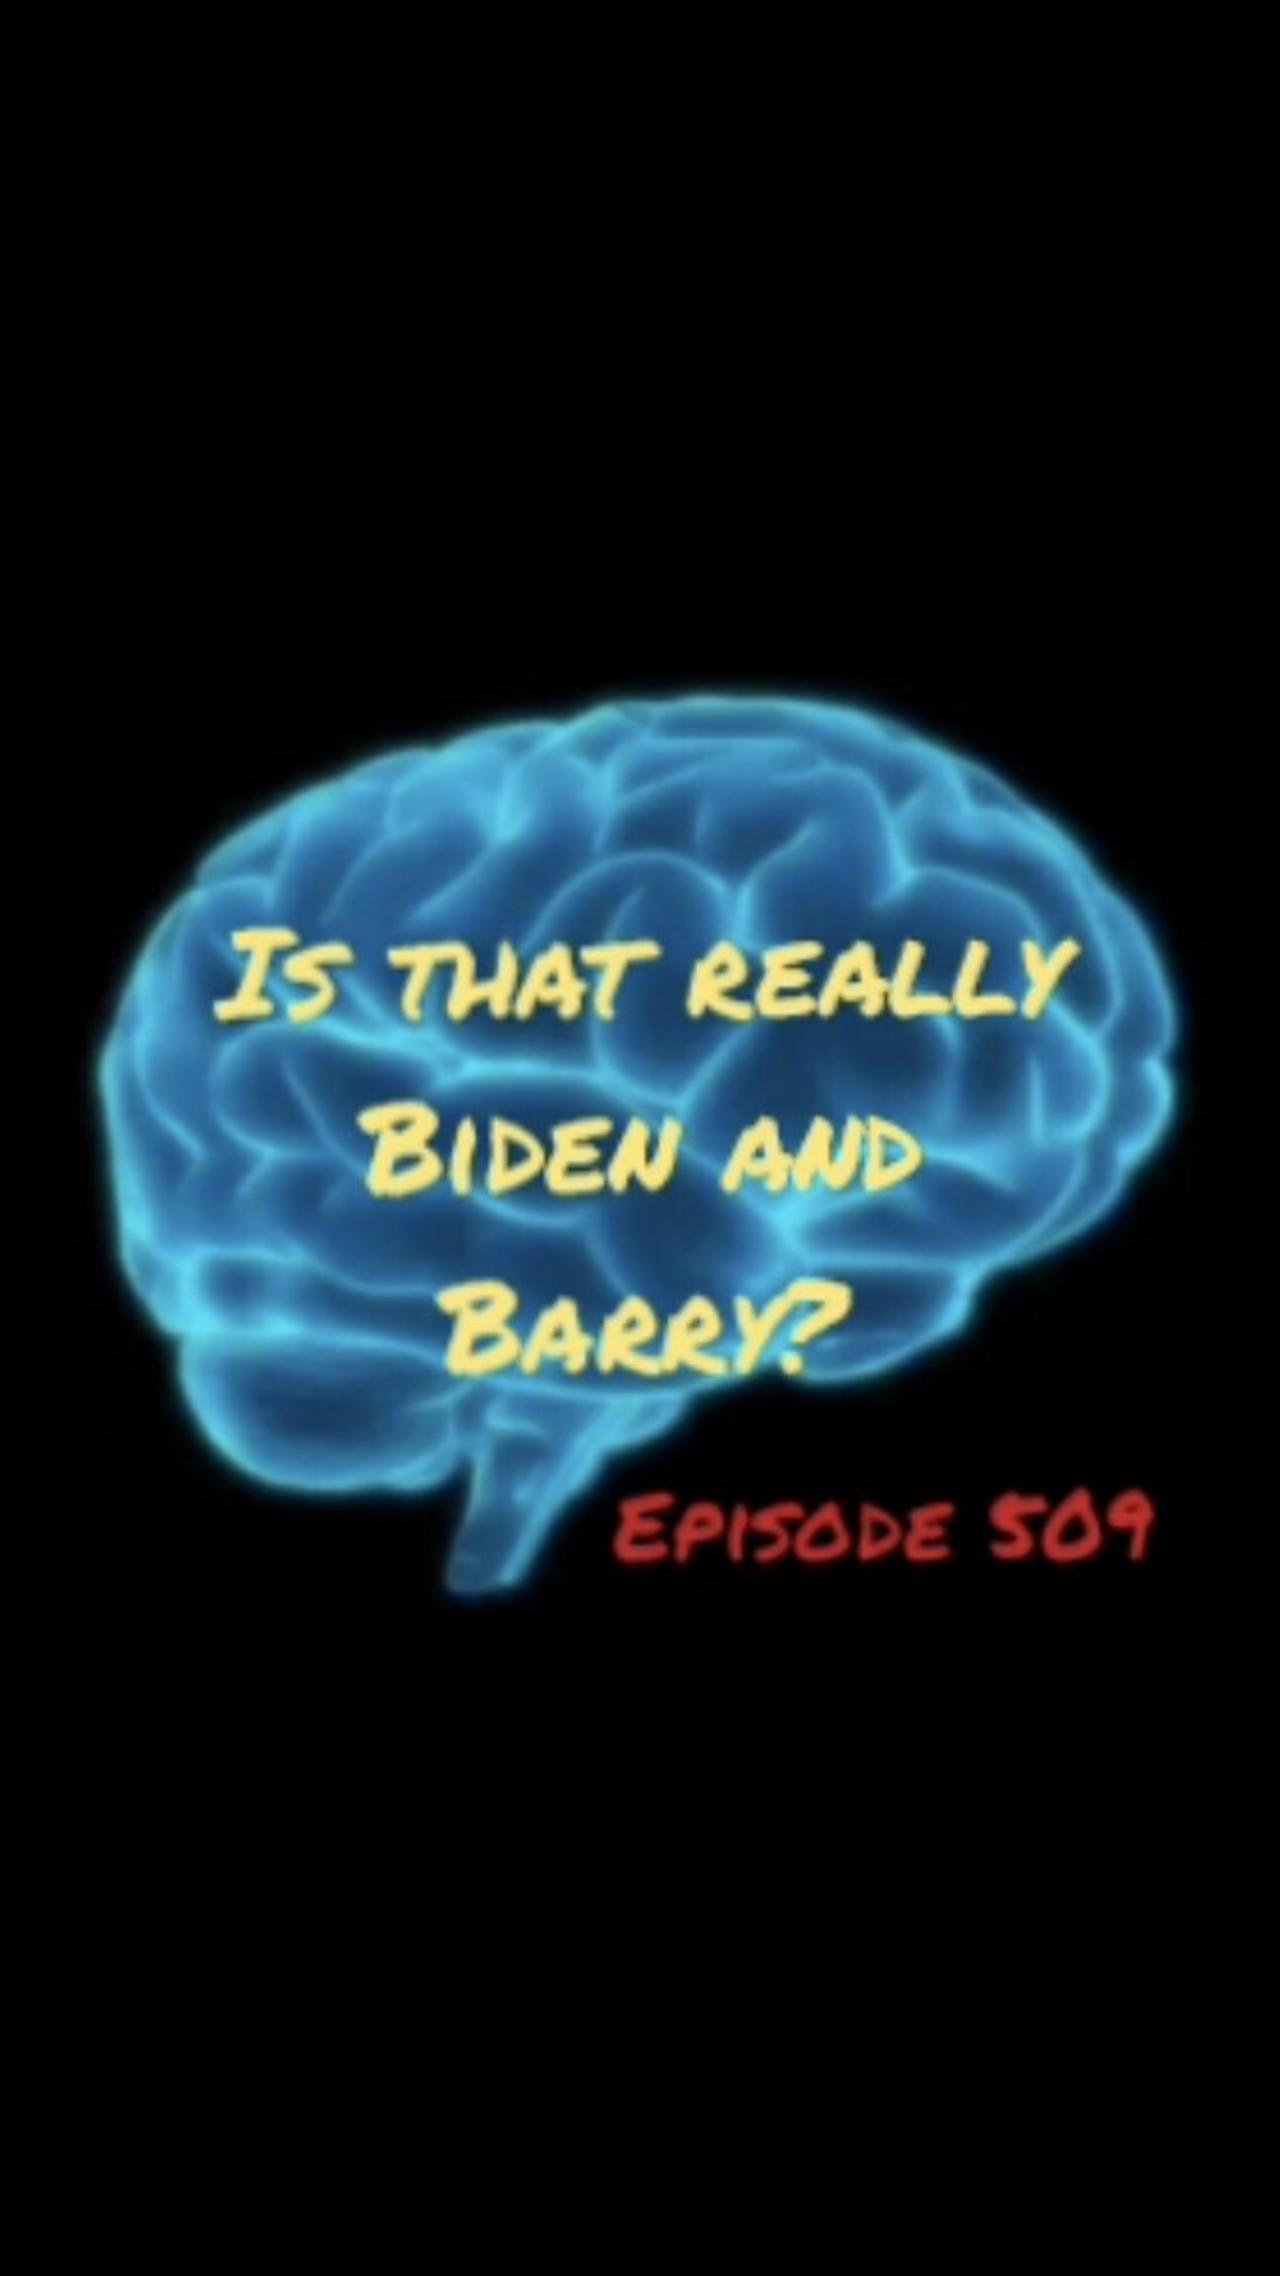 IS THAT REALLY PEDO JOE AND BARRY? WAR FOR YOUR MIND, Episode 509 with HonestWalterWhite